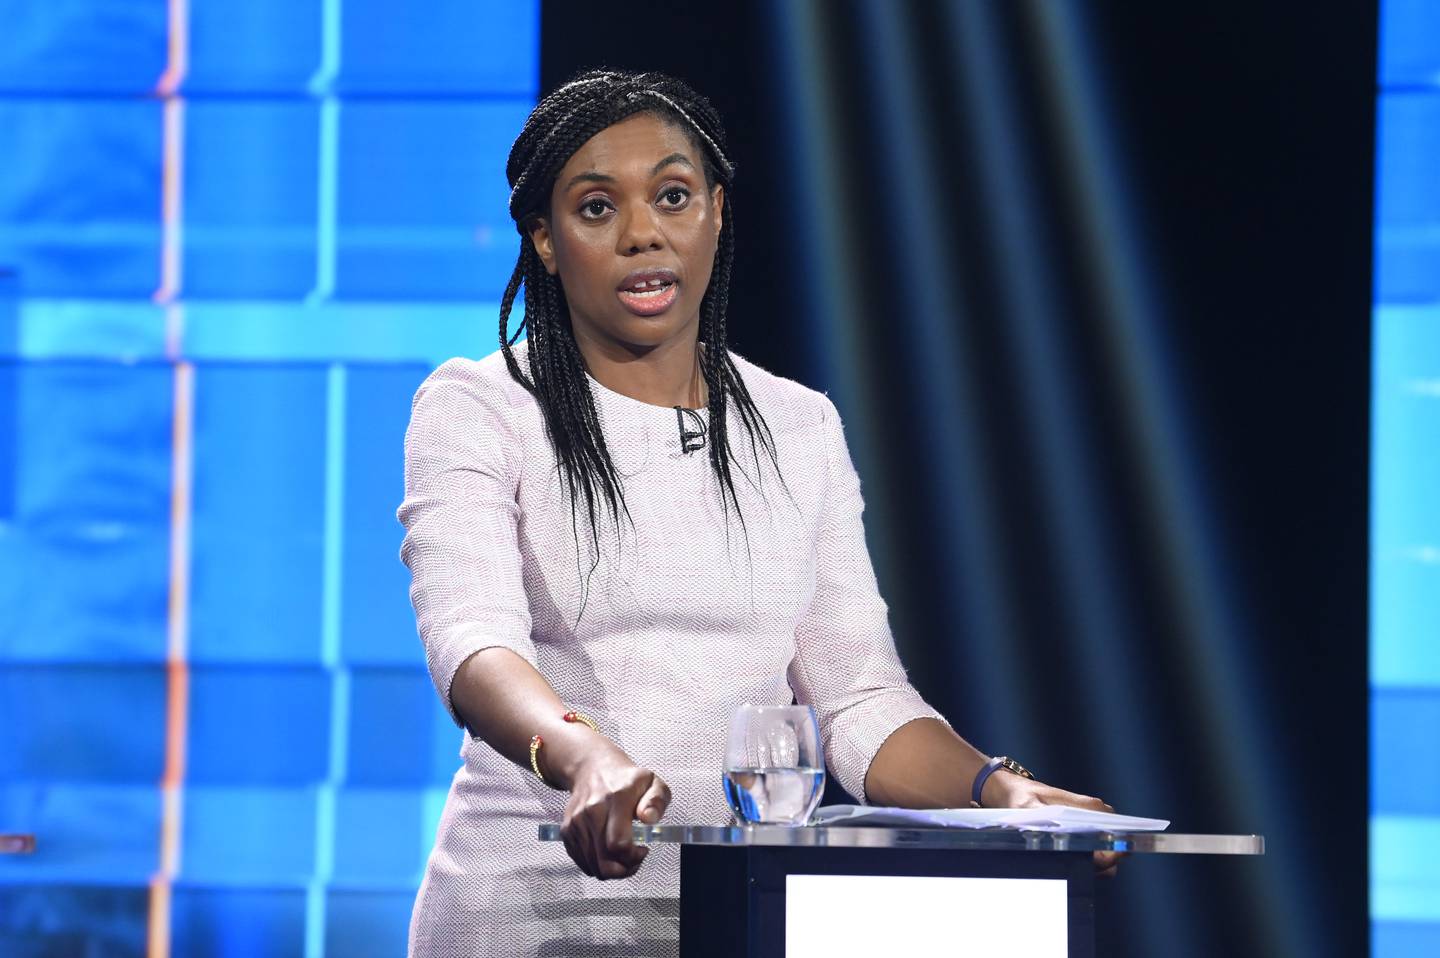 Kemi Badenoch taking part in Britain's Next Prime Minister: The ITV Debate, a head-to-head debate between Conservative Party leadership candidates in July. PA